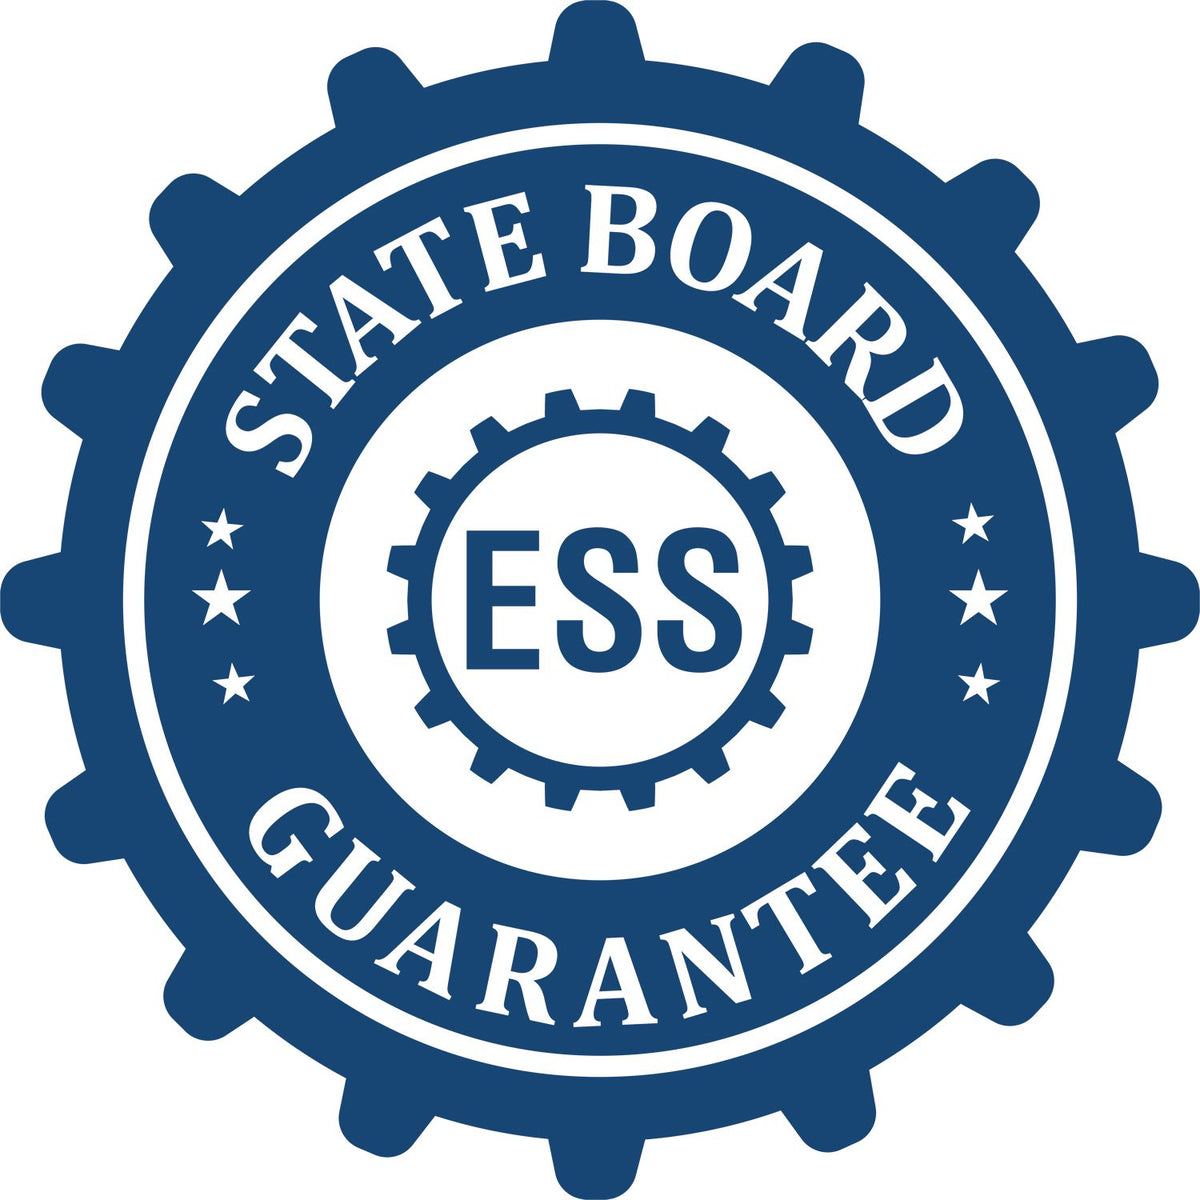 An emblem in a gear shape illustrating a state board guarantee for the Kentucky Geologist Desk Seal